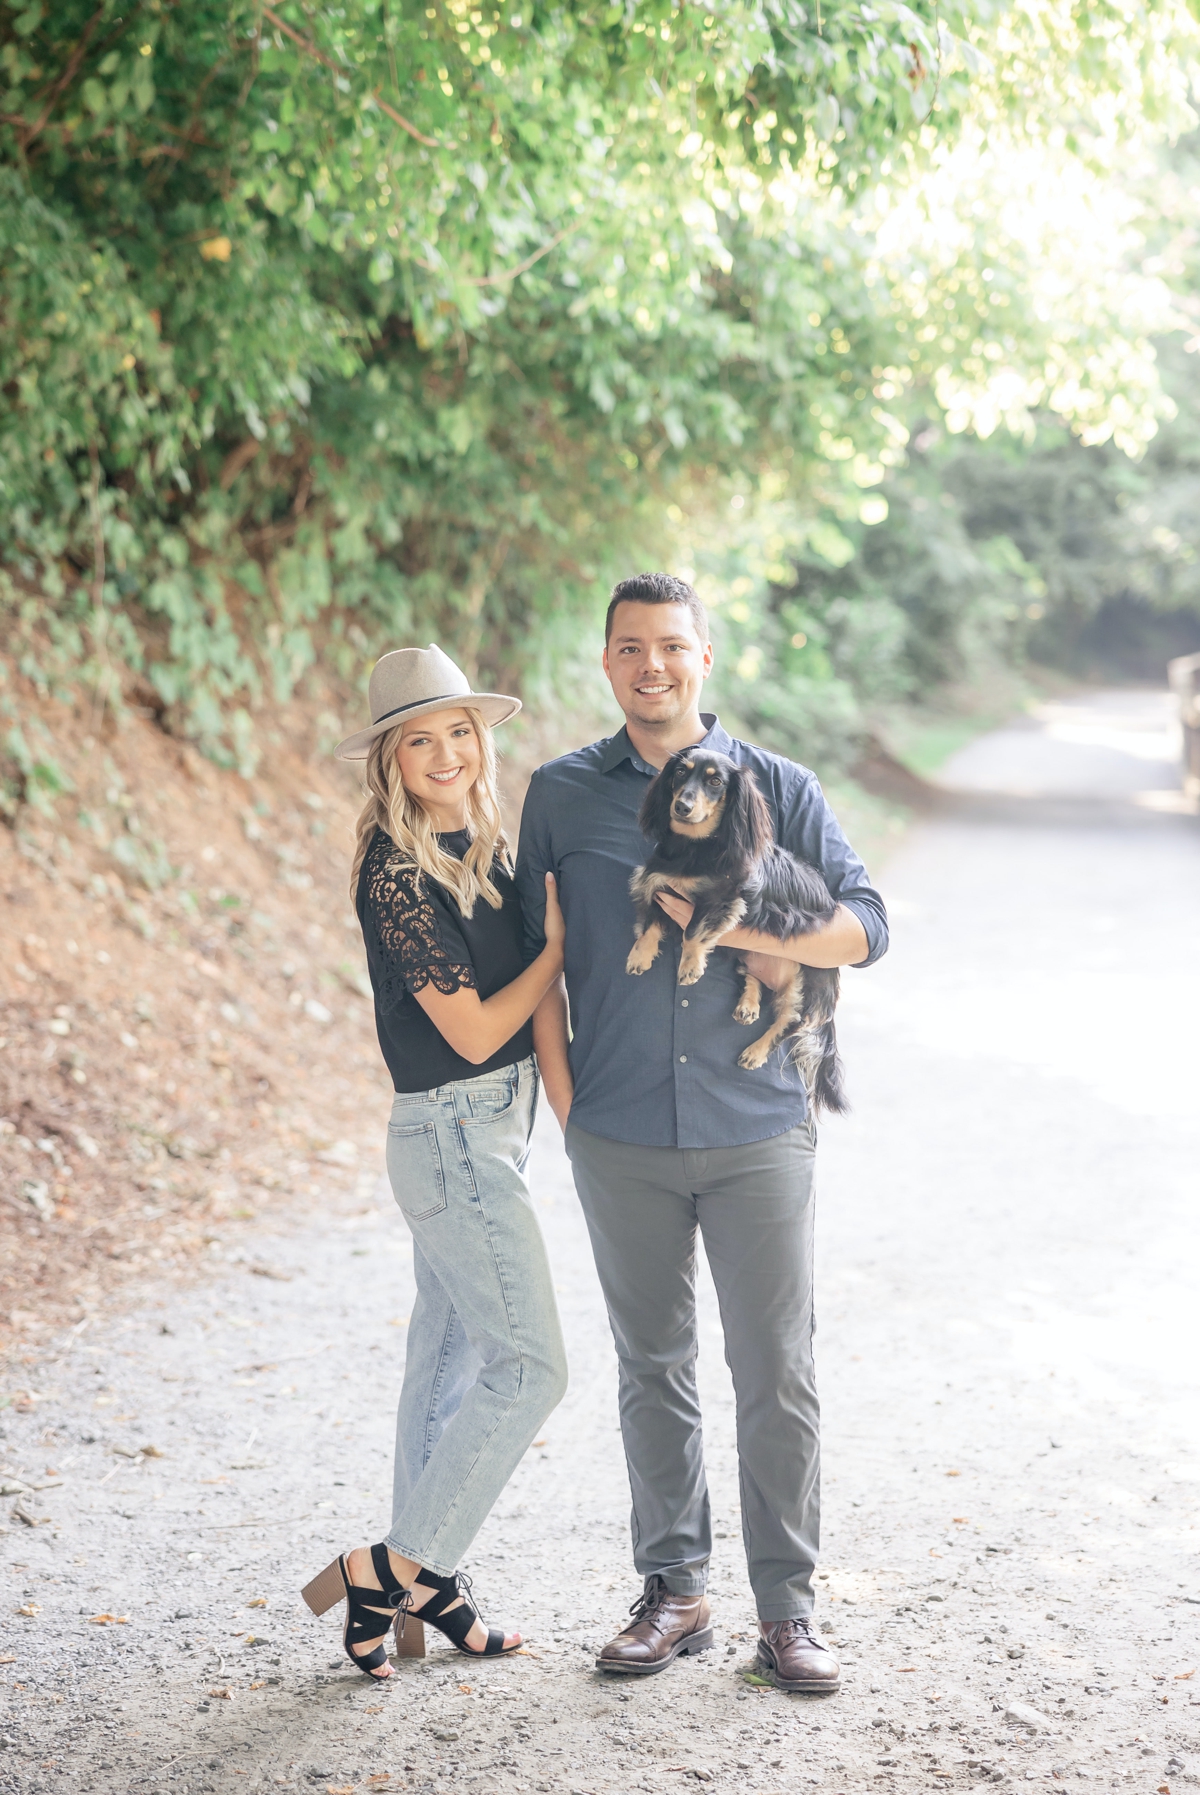 Julia and Taylor holding their dog on a path during their engagement session.